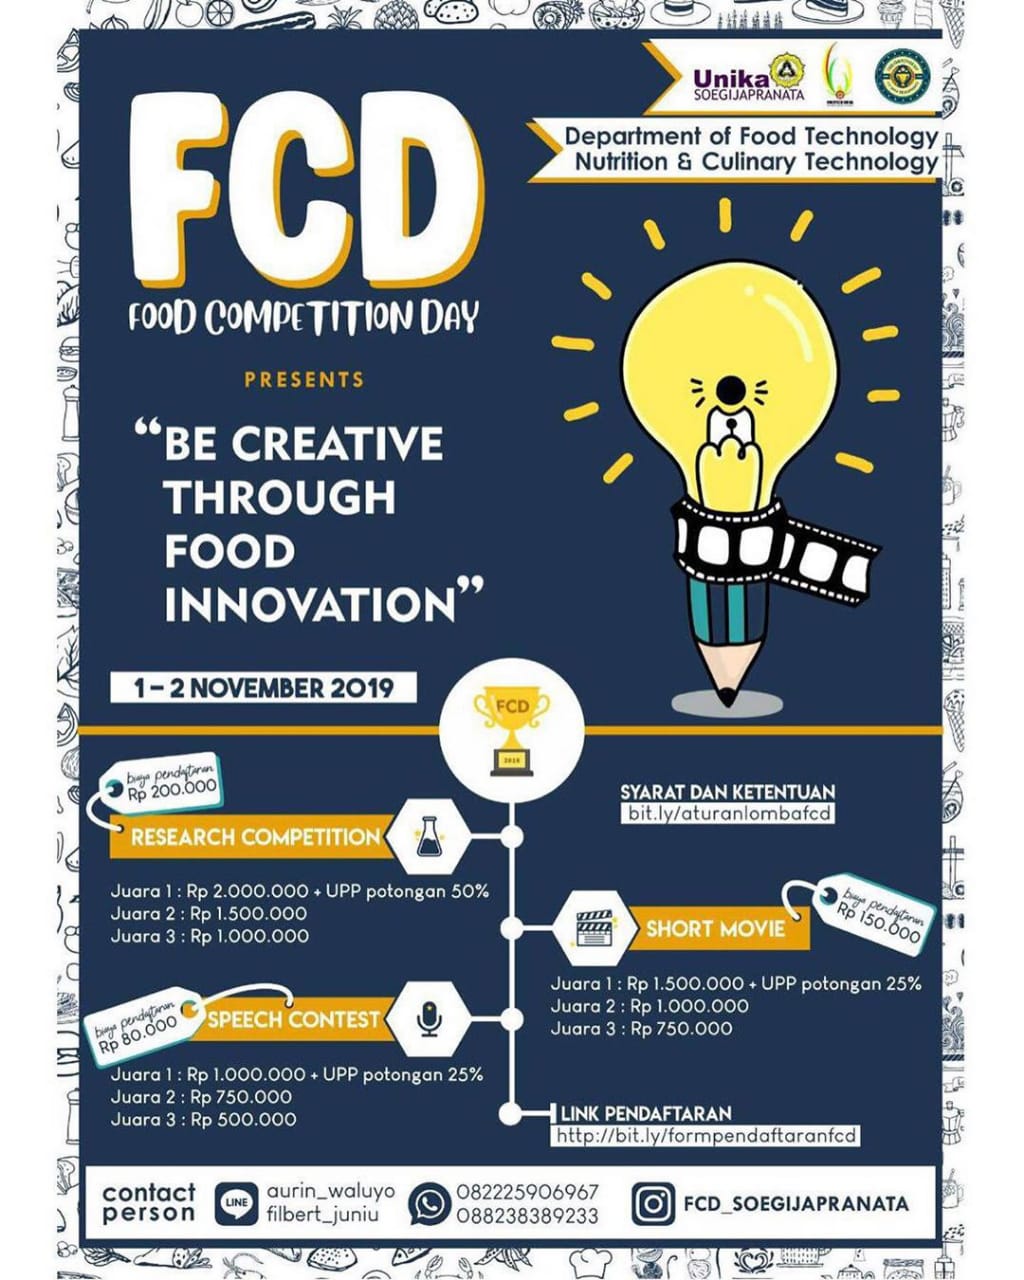 FOOD COMPETITION DAY 2019 PRESENTS BE CREATIVE THROUGH FOOD INNOVATION